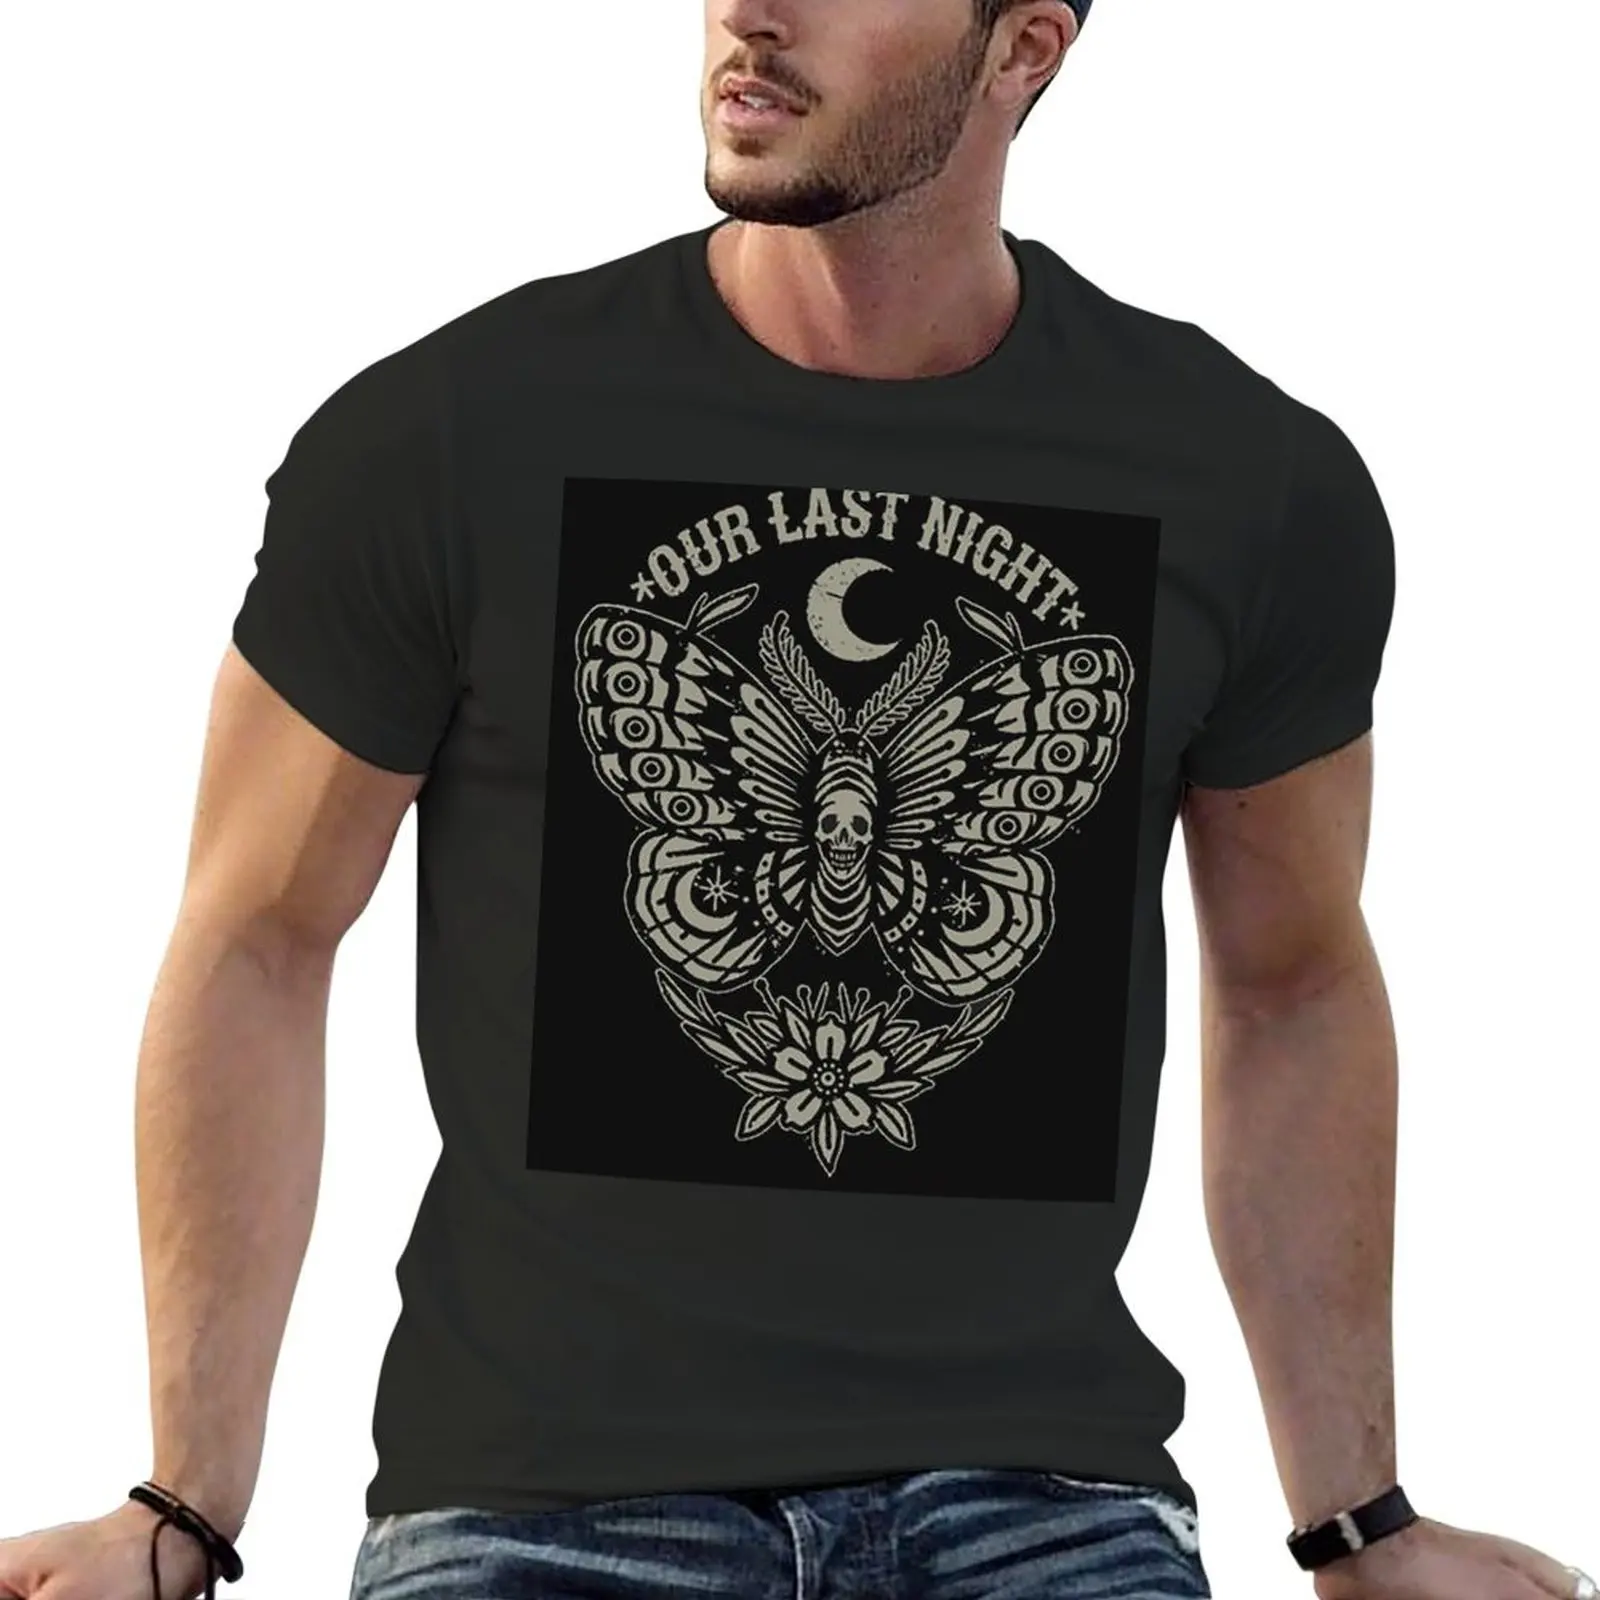 

Our Last Night T-shirt oversized sports fans sweat men clothing